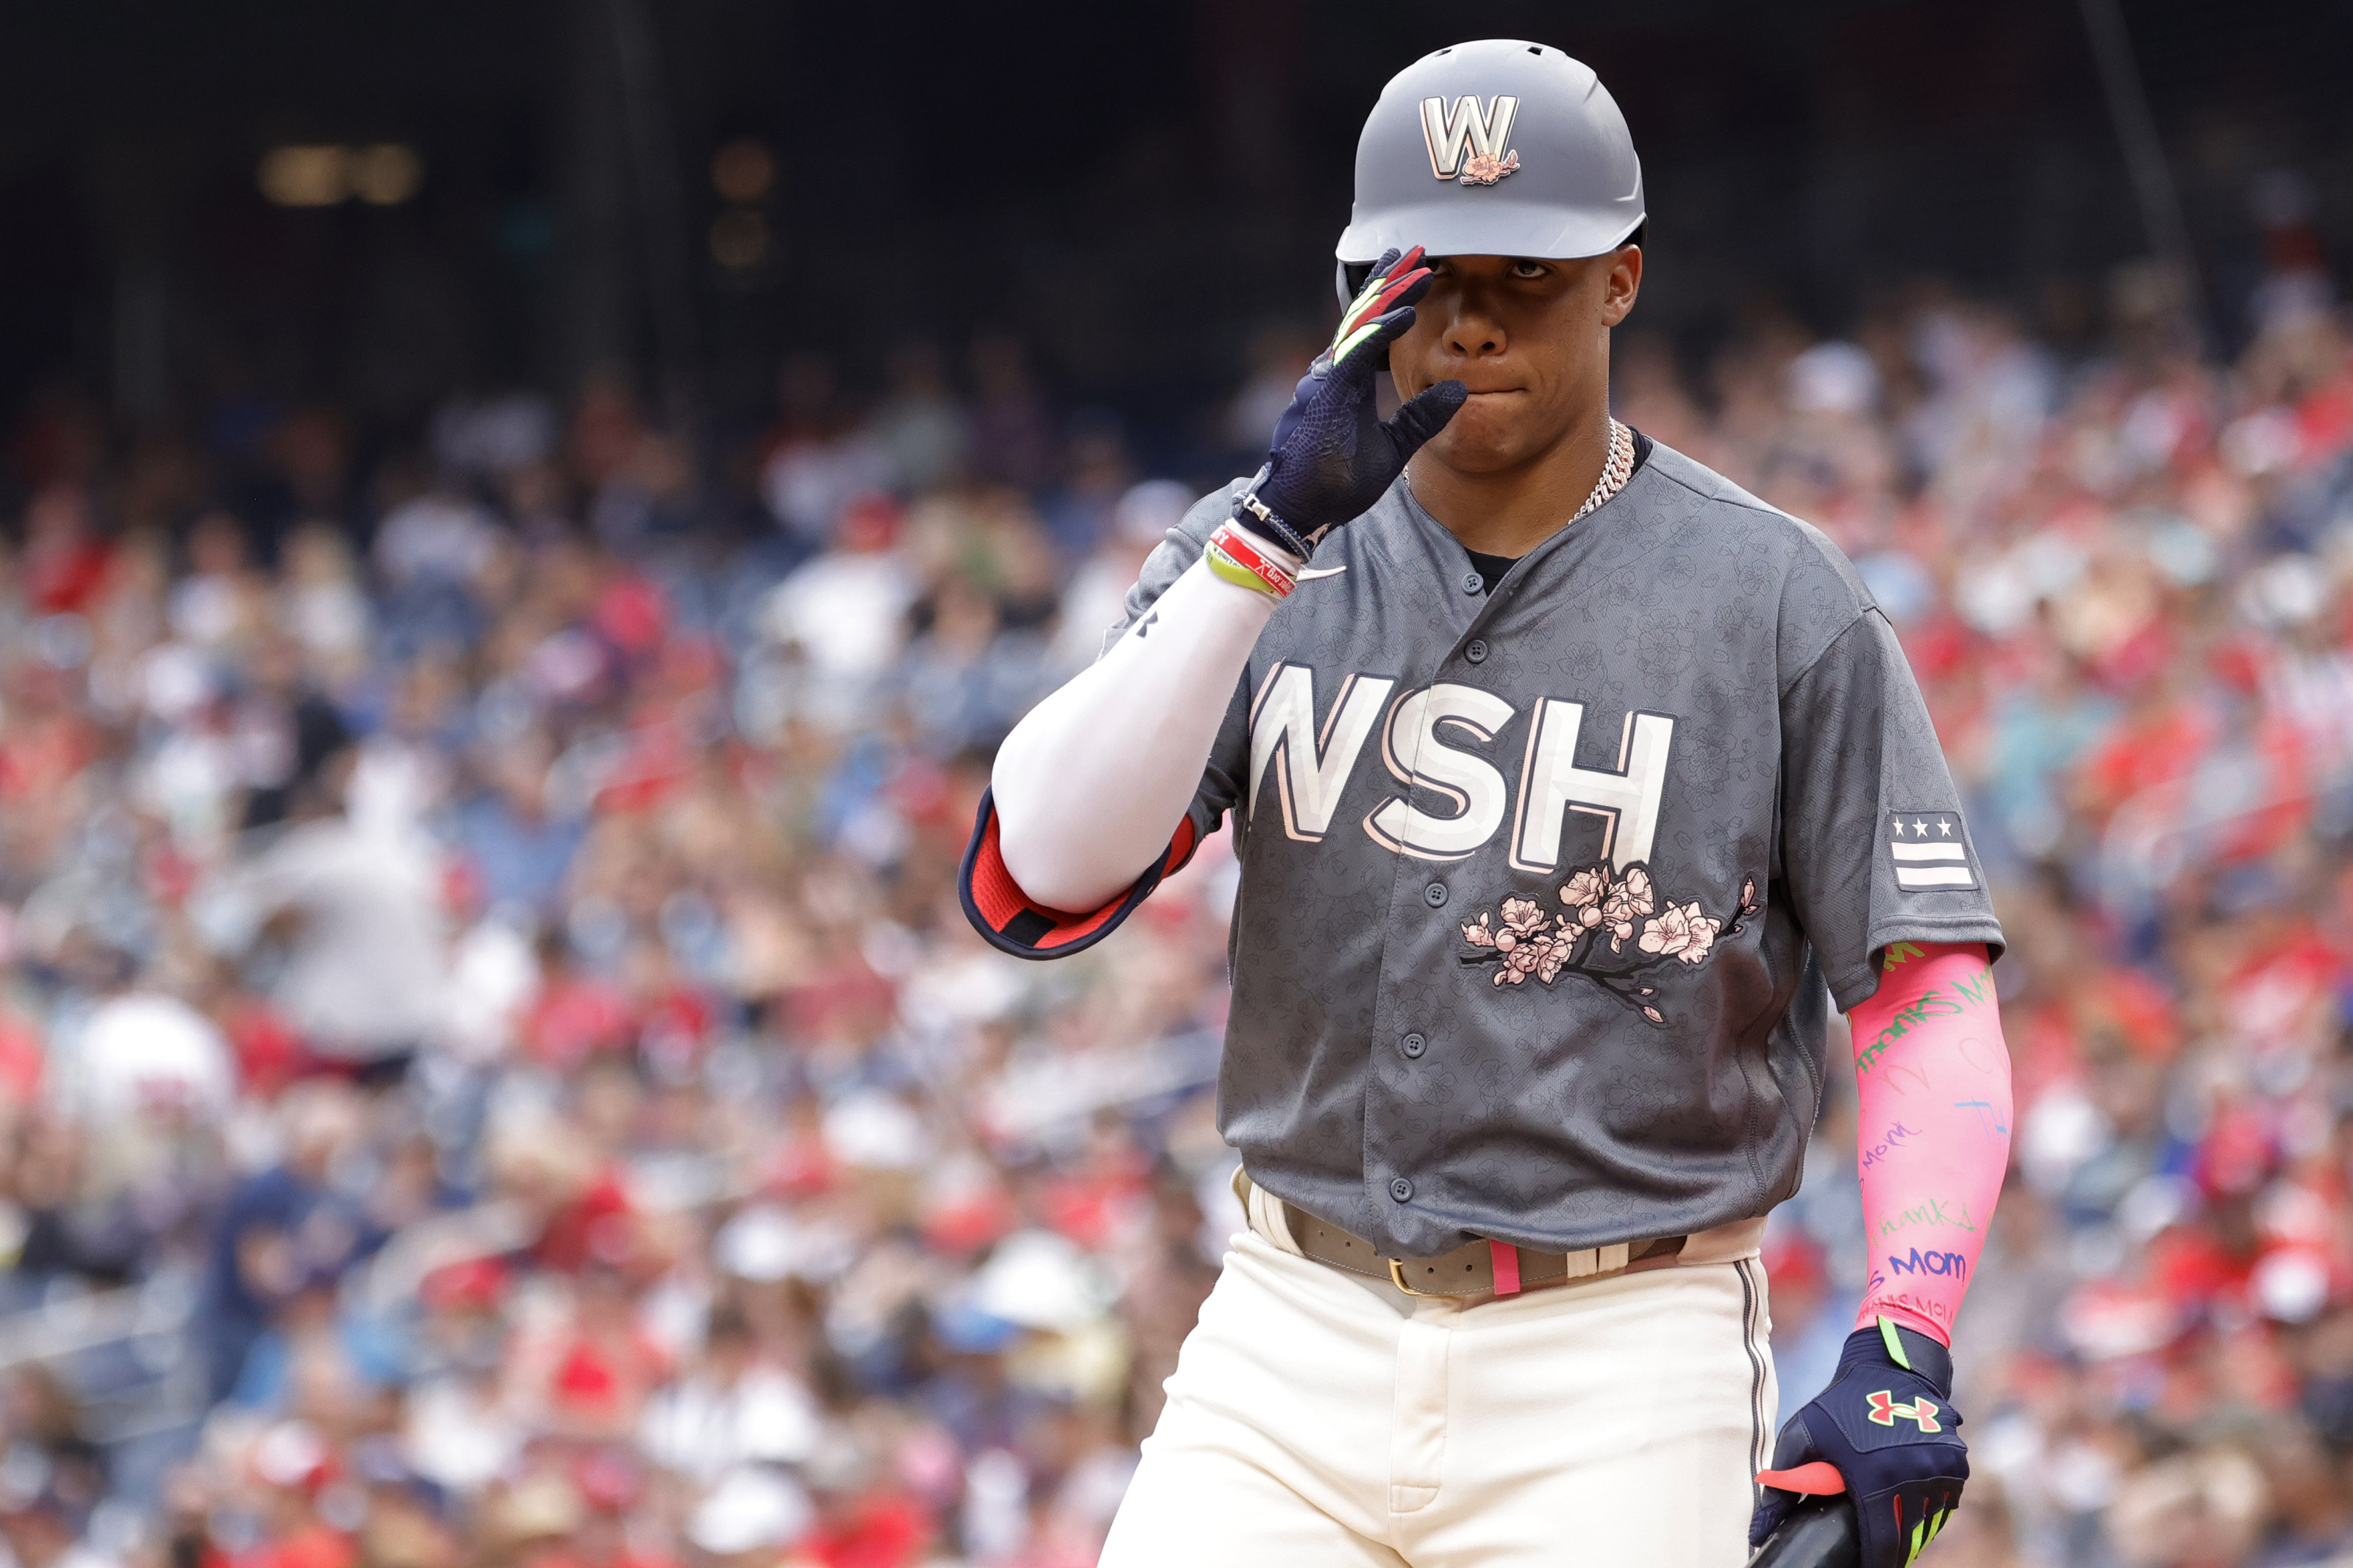 Yankees: 3 prospects New York would have to sell in Juan Soto